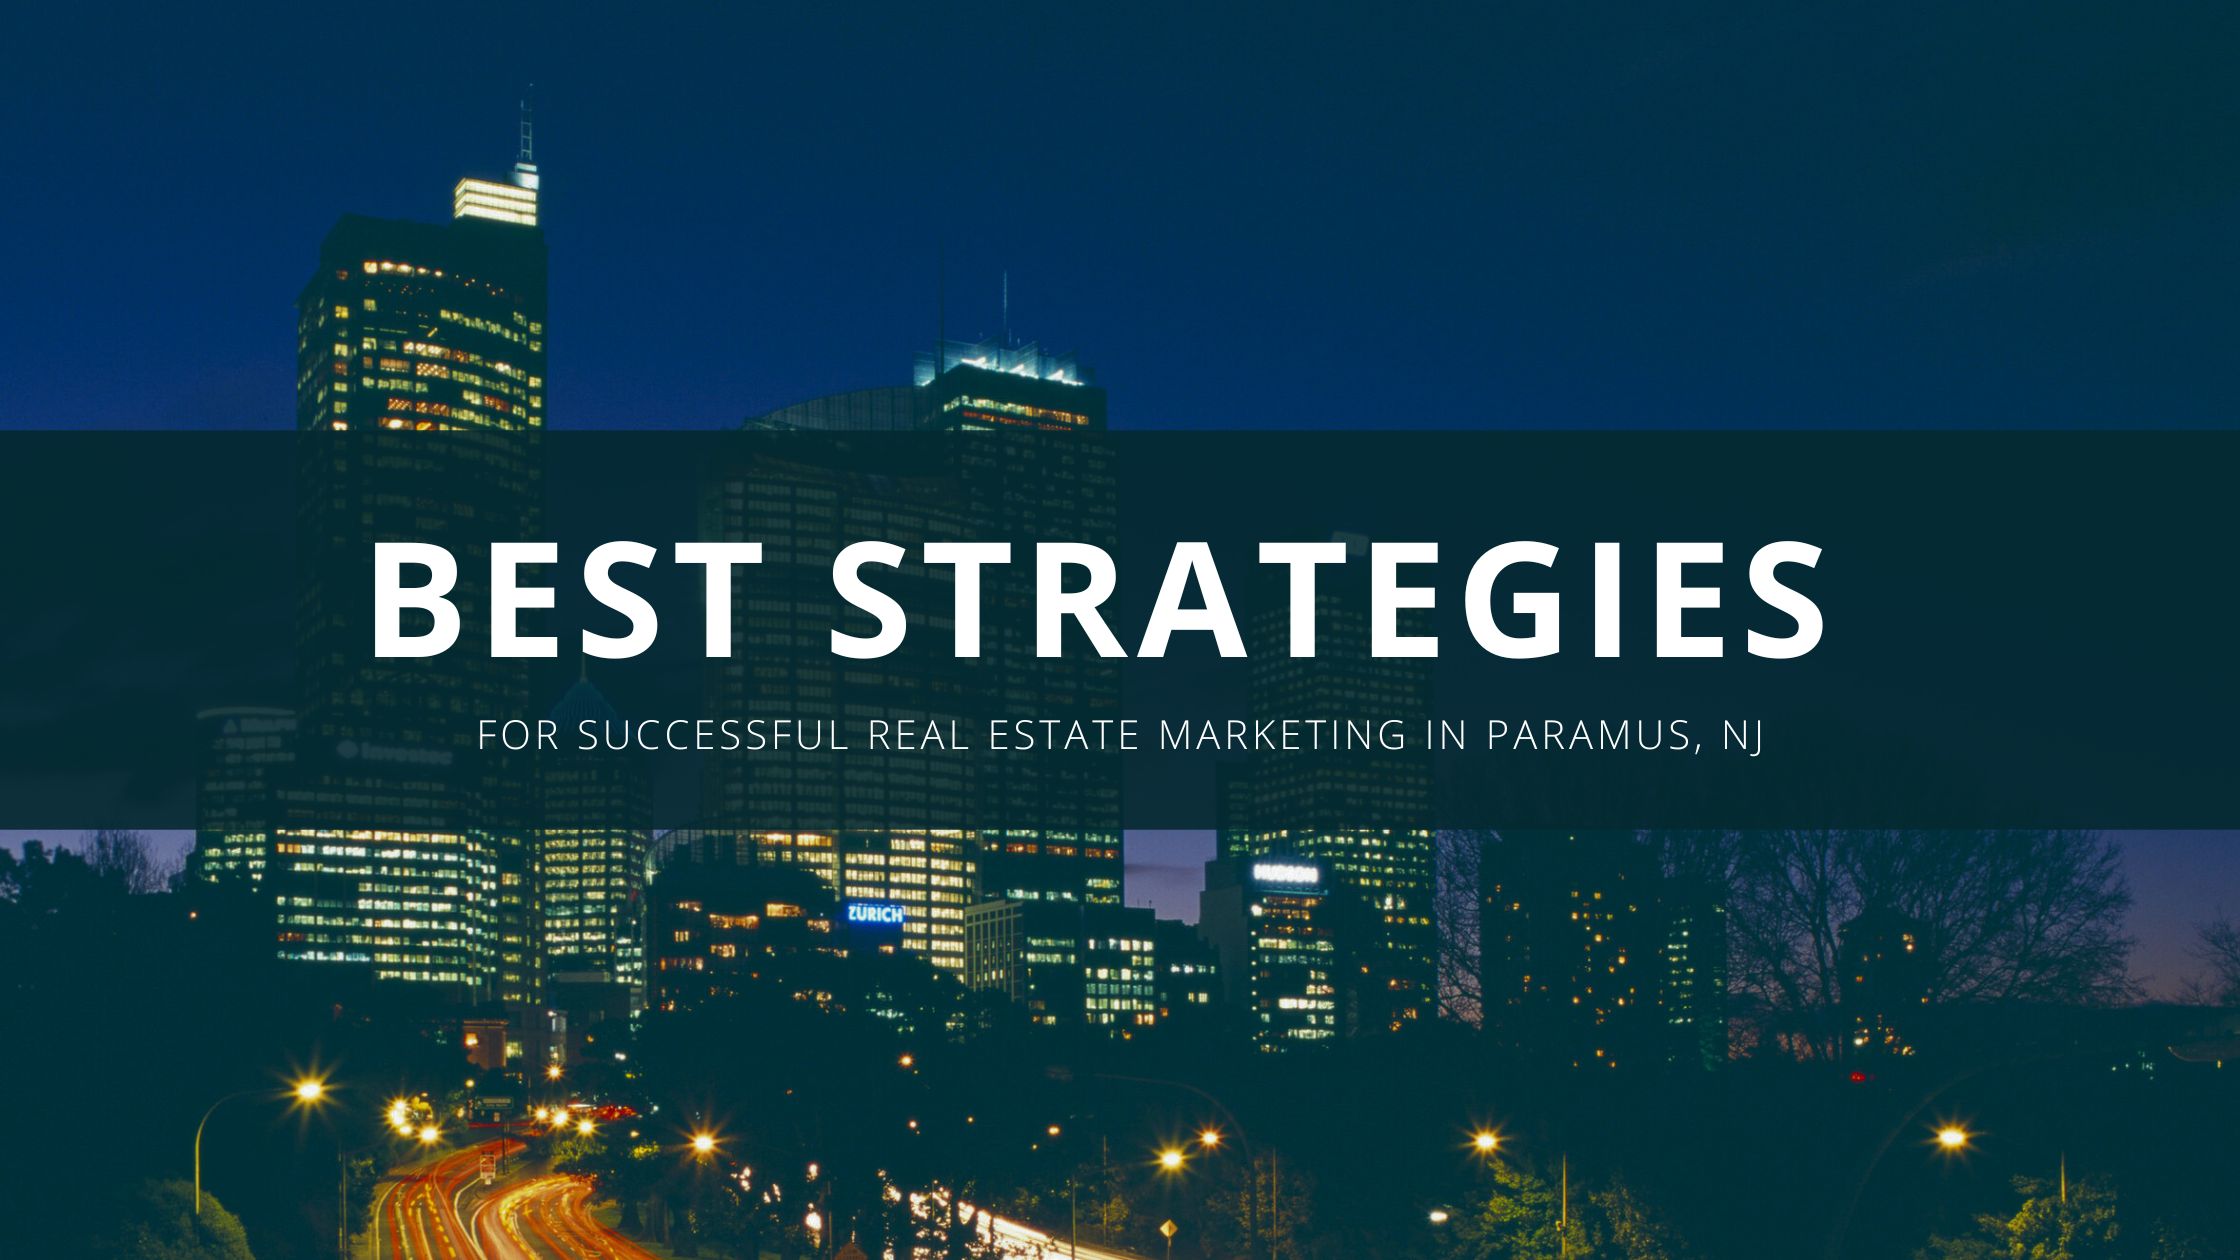 Best Strategies for Real Estate marketing